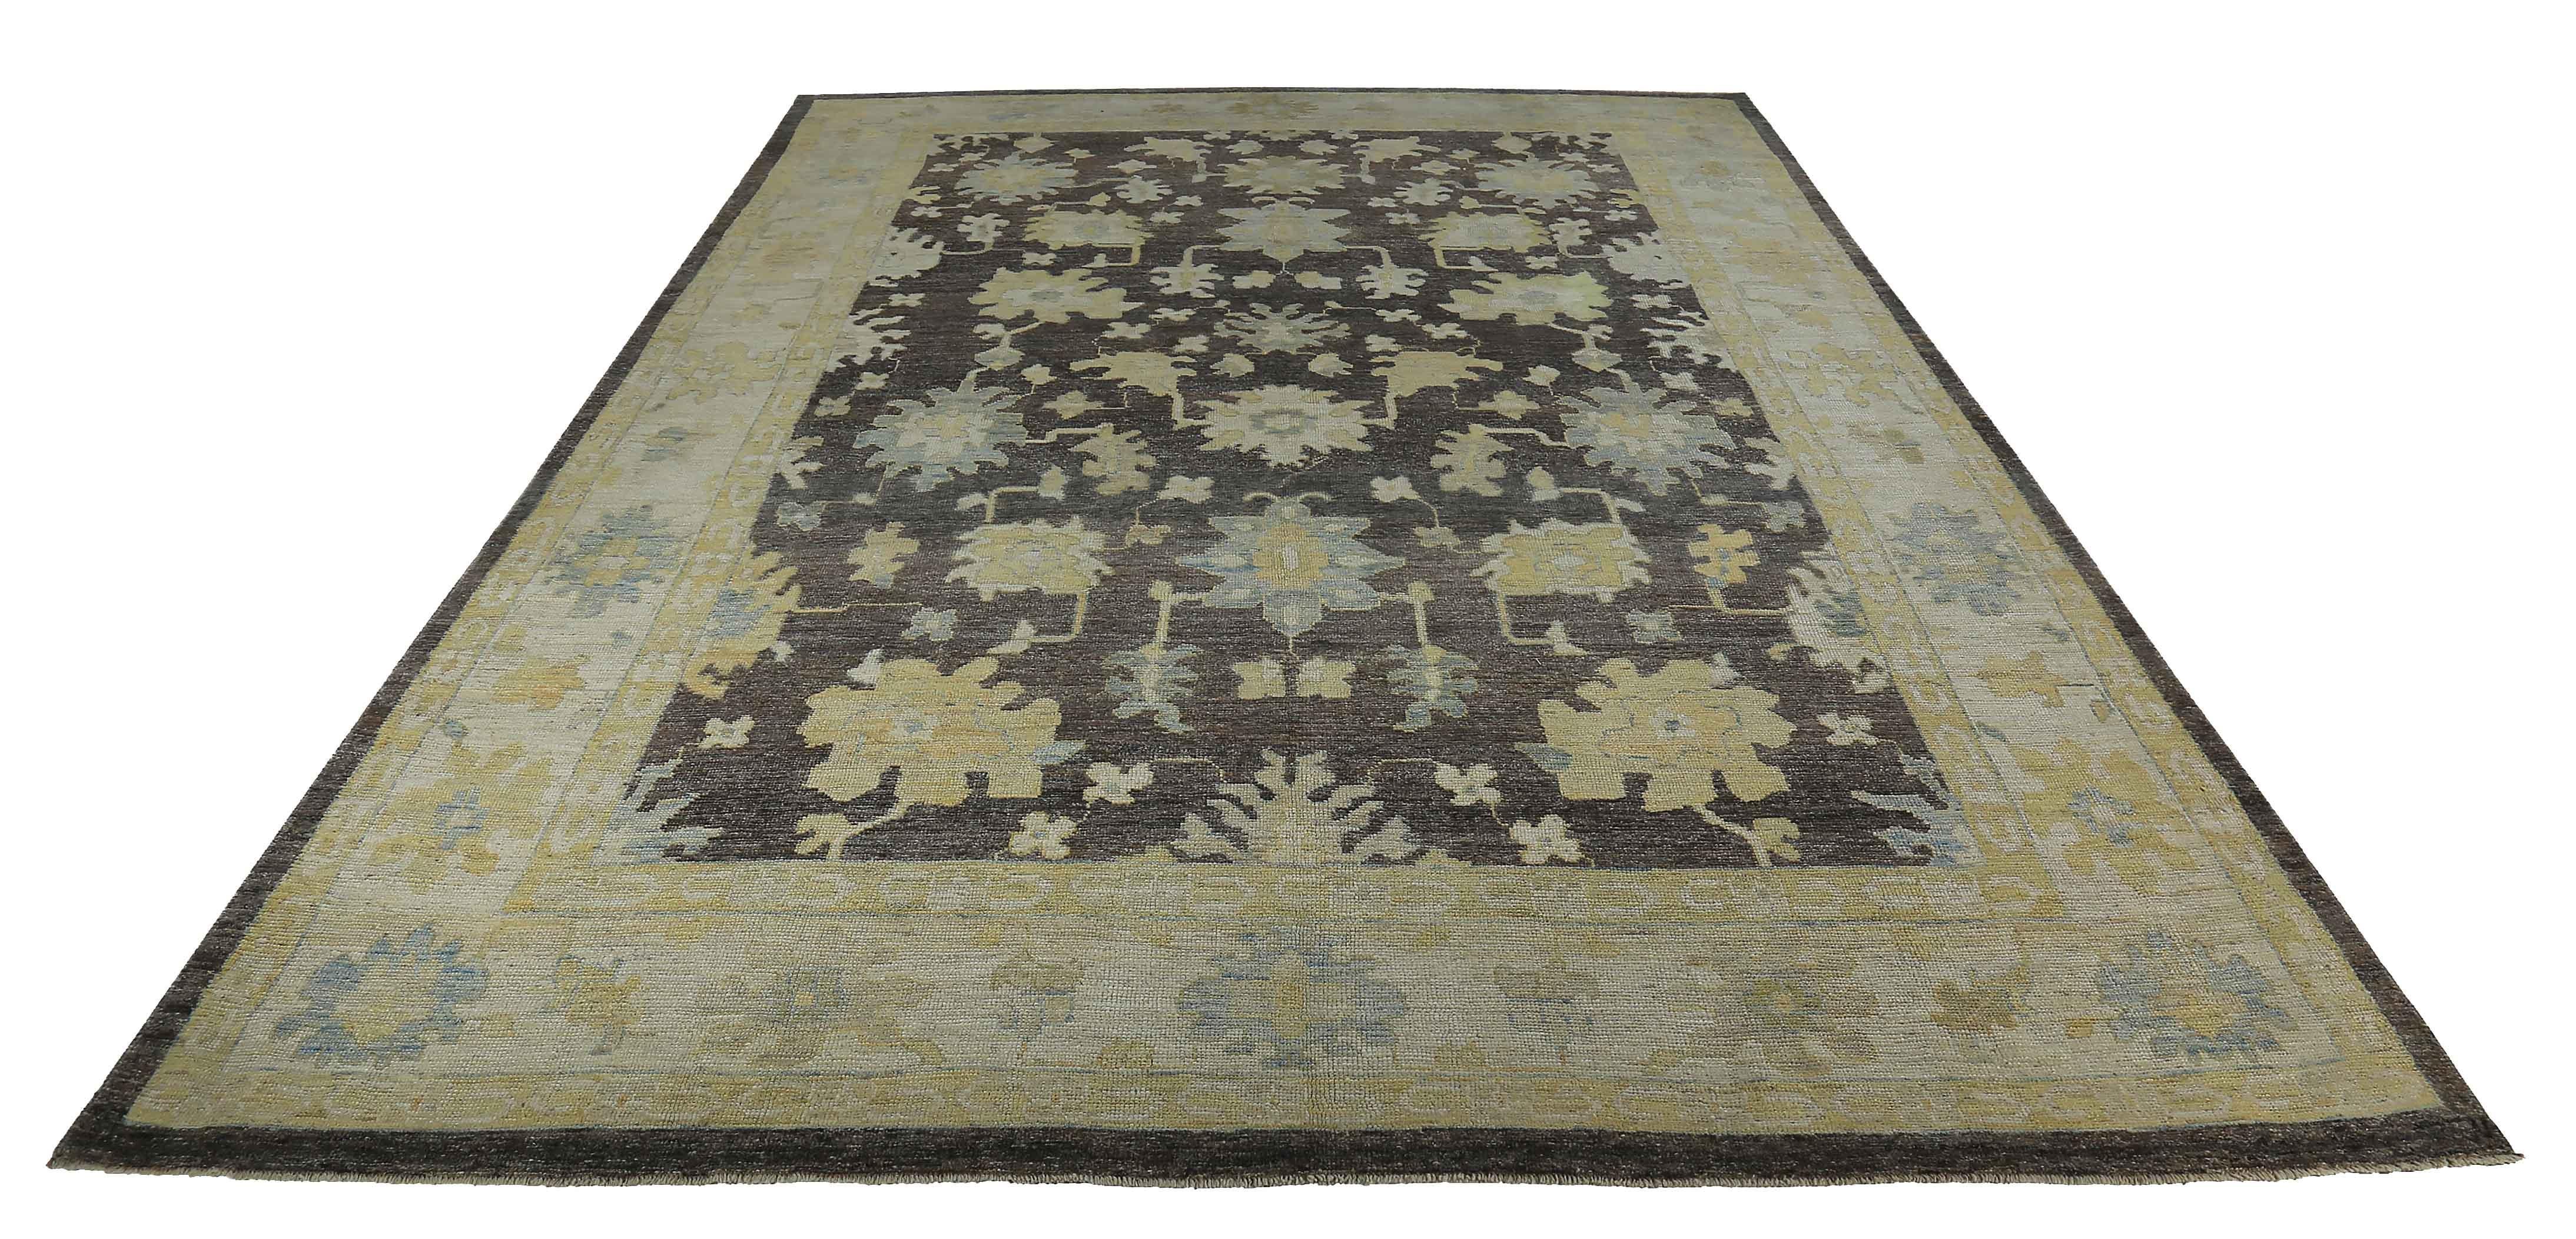 New Turkish rug made of handwoven sheep’s wool of the finest quality. It’s colored with organic vegetable dyes that are certified safe for humans and pets alike. It features blue and gold floral details on a brown field. Flower patterns are commonly